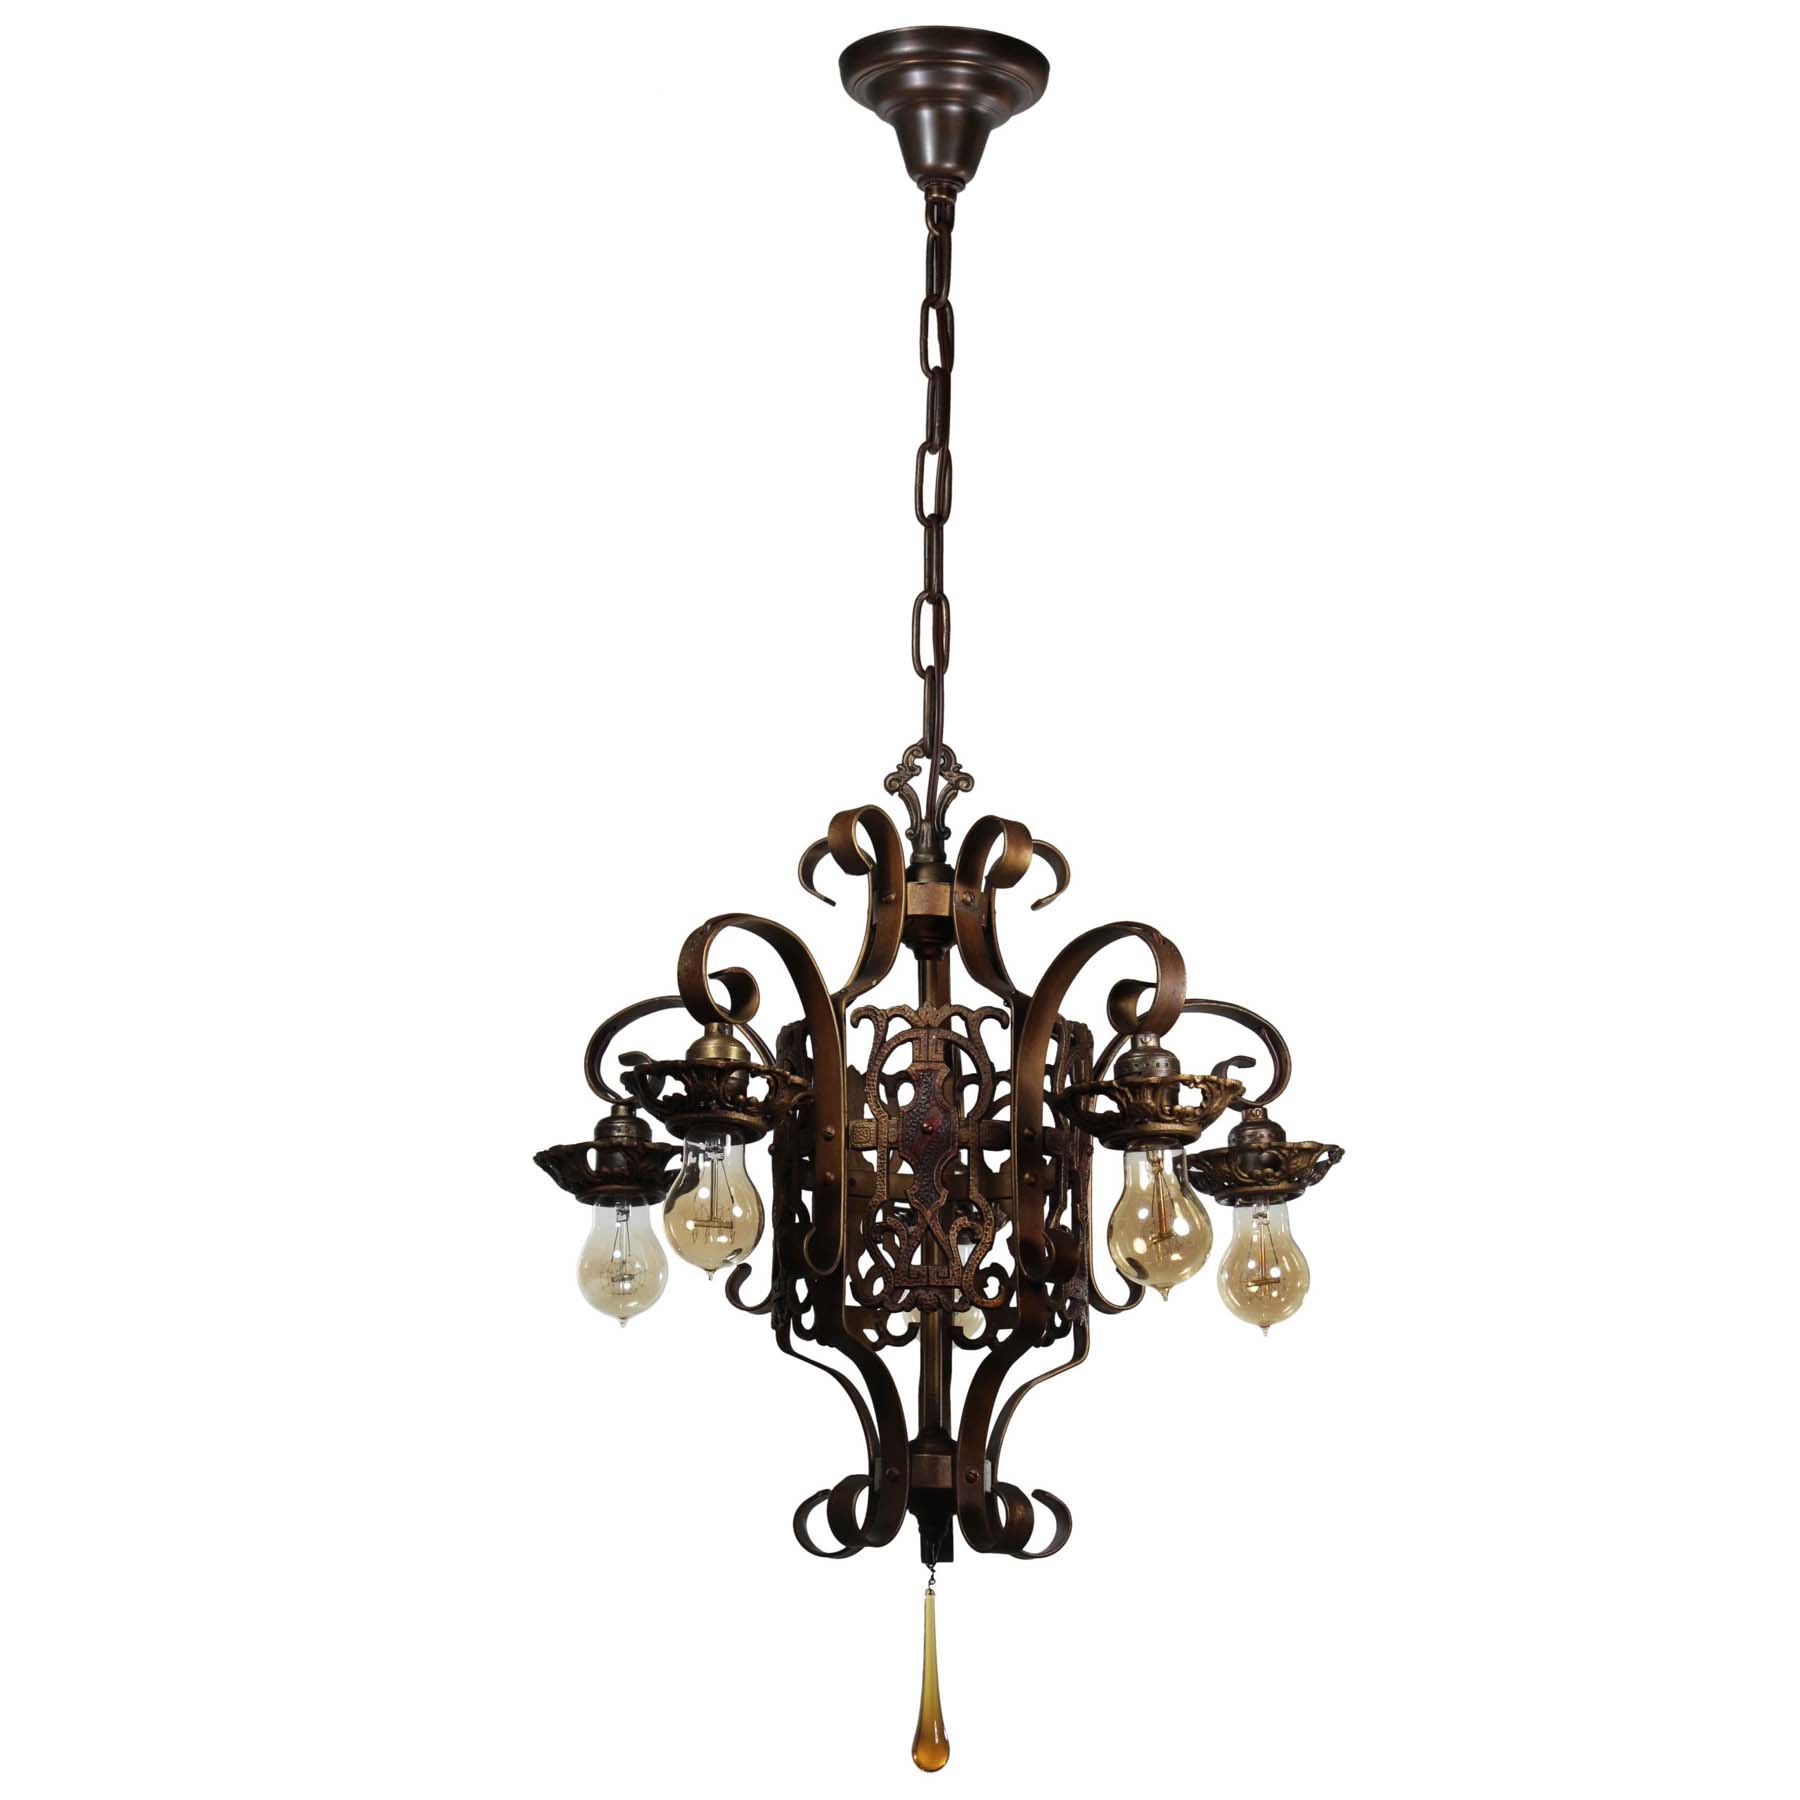 Antique Spanish Revival Five-Light Chandelier, Early 1900s-70536